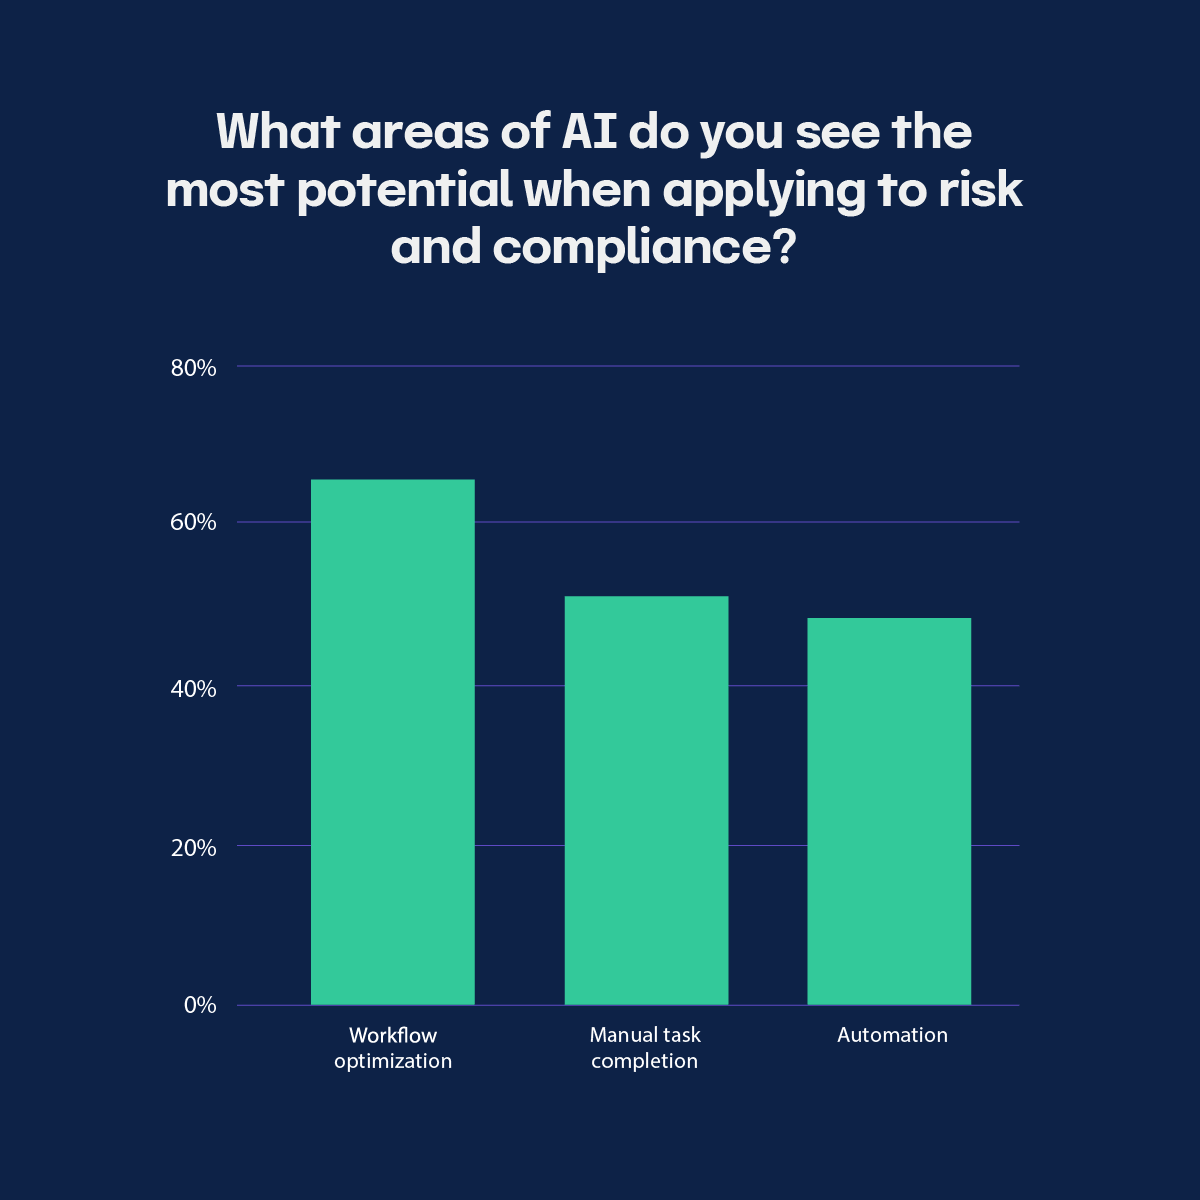 Workflow optimization, manual task completion, and automation are areas in risk and compliance where AI has potential